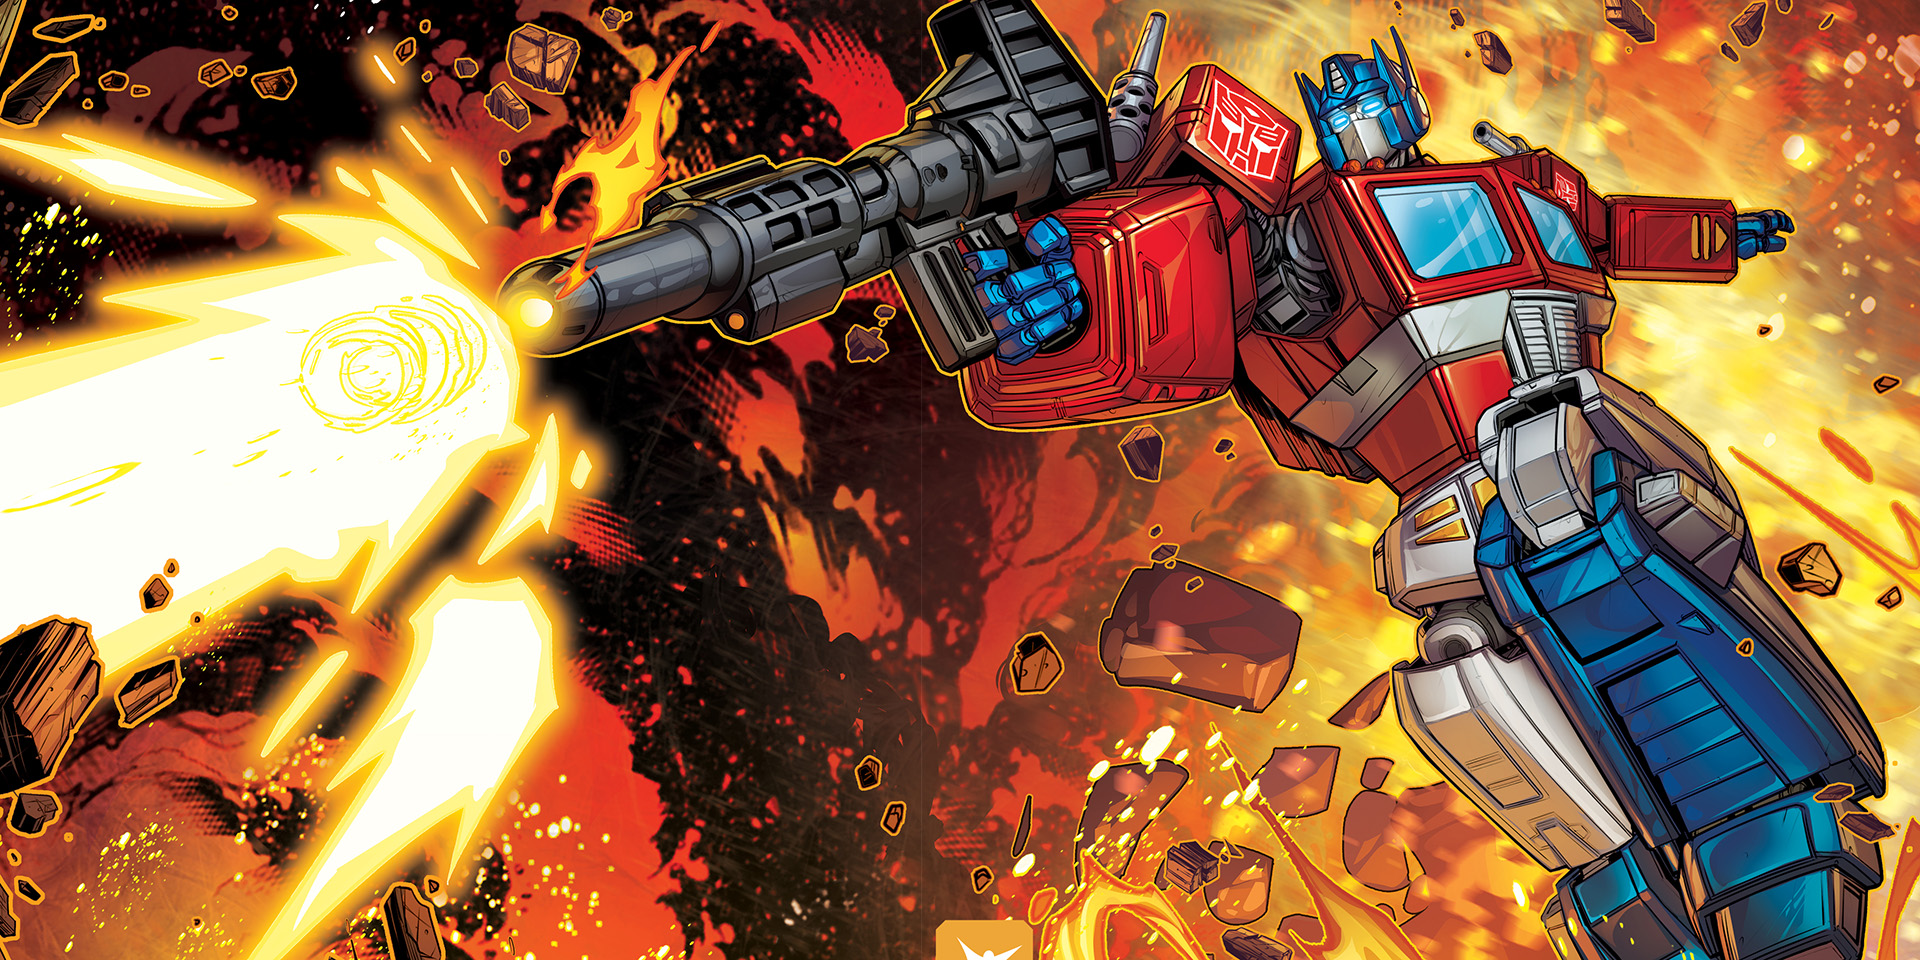 CHECK OUT THESE PAGES AND COVERS FROM TRANSFORMERS #4